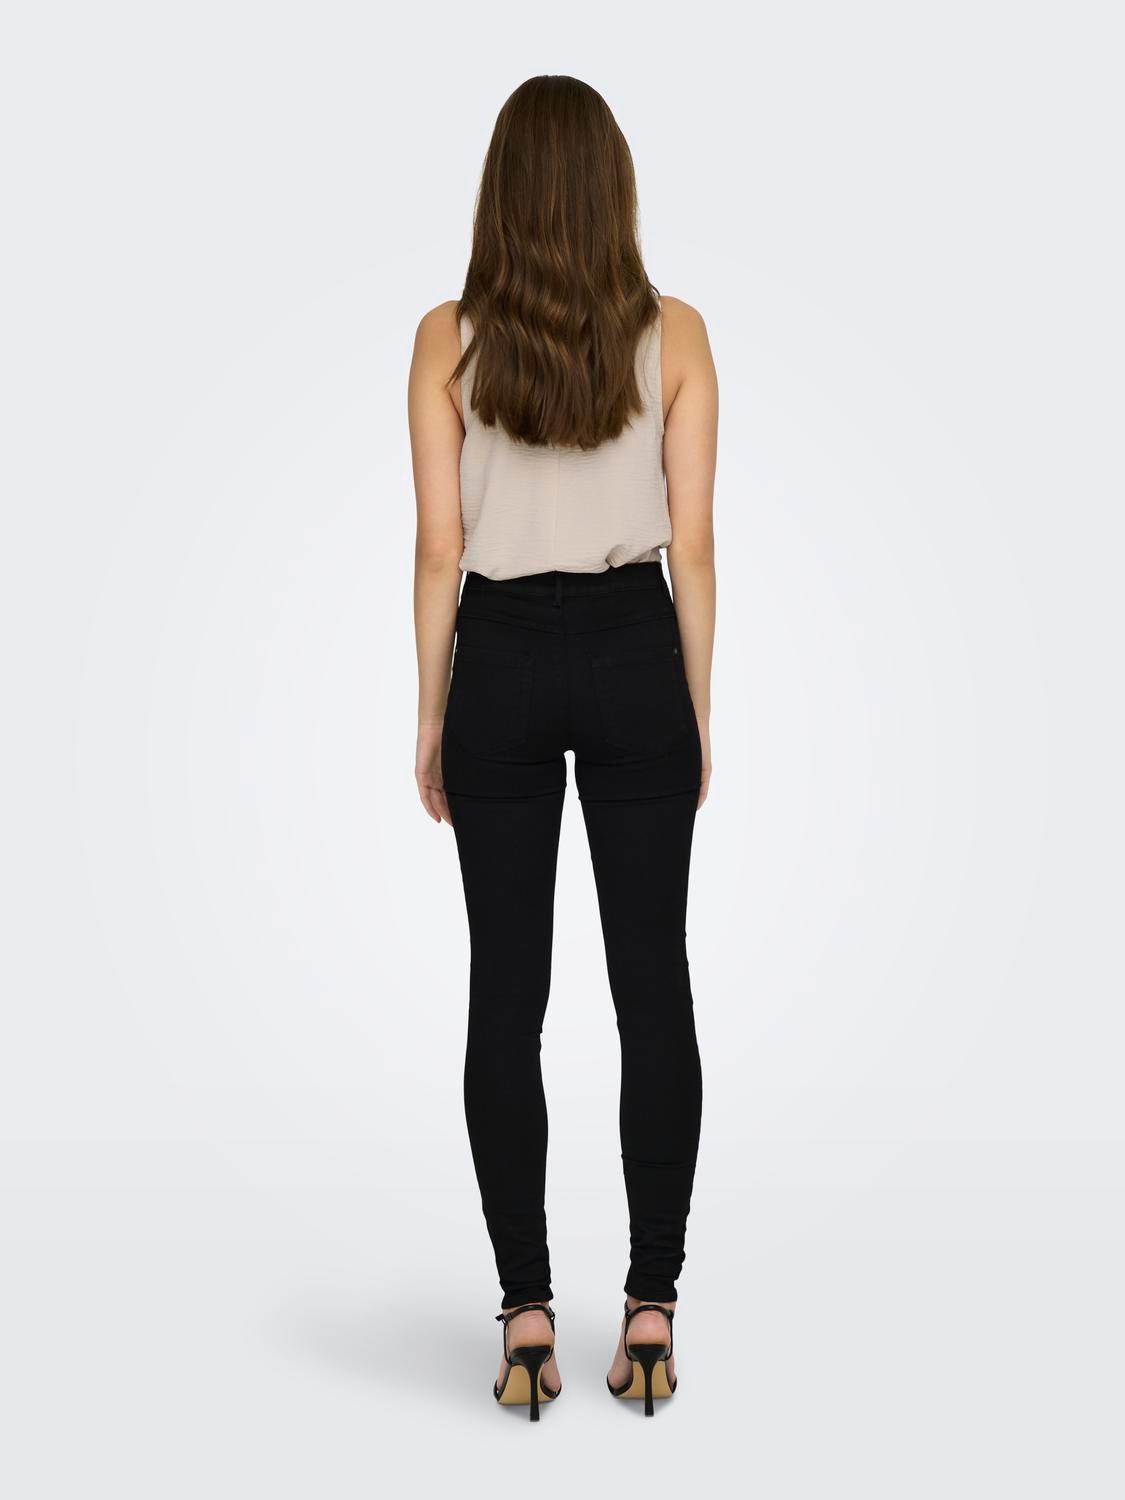 ONLY Skinny Fit High waist Jeans -Black - 15093134